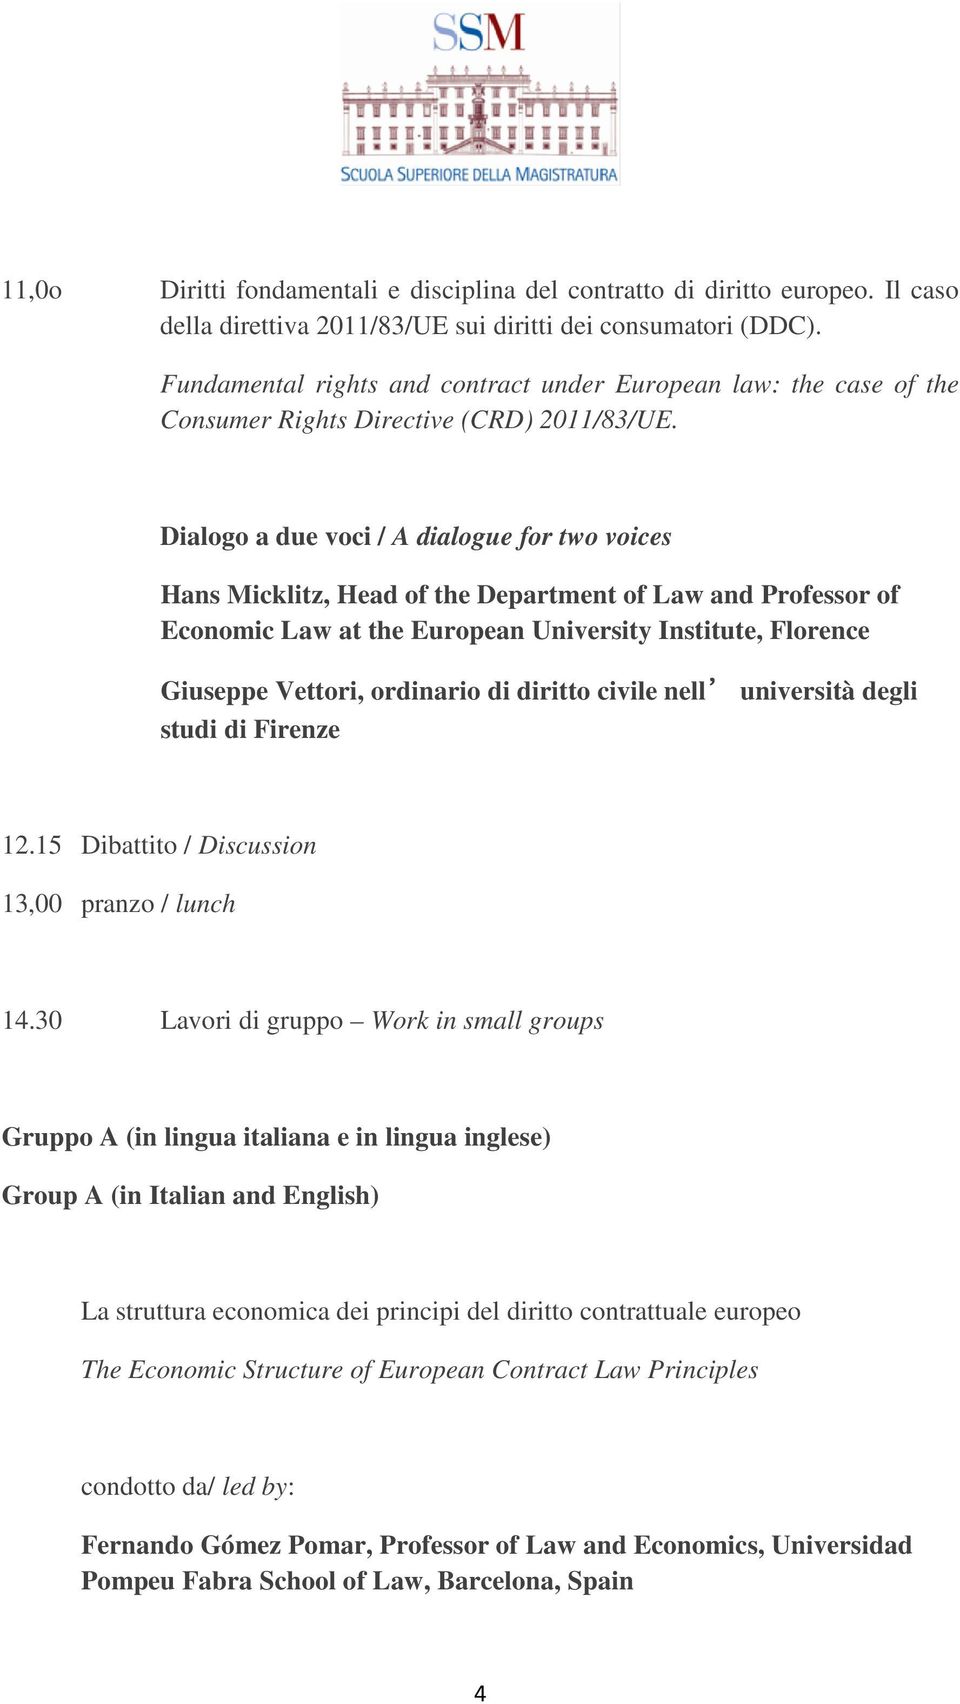 Dialogo a due voci / A dialogue for two voices Hans Micklitz, Head of the Department of Law and Professor of Economic Law at the European University Institute, Florence Giuseppe Vettori, ordinario di